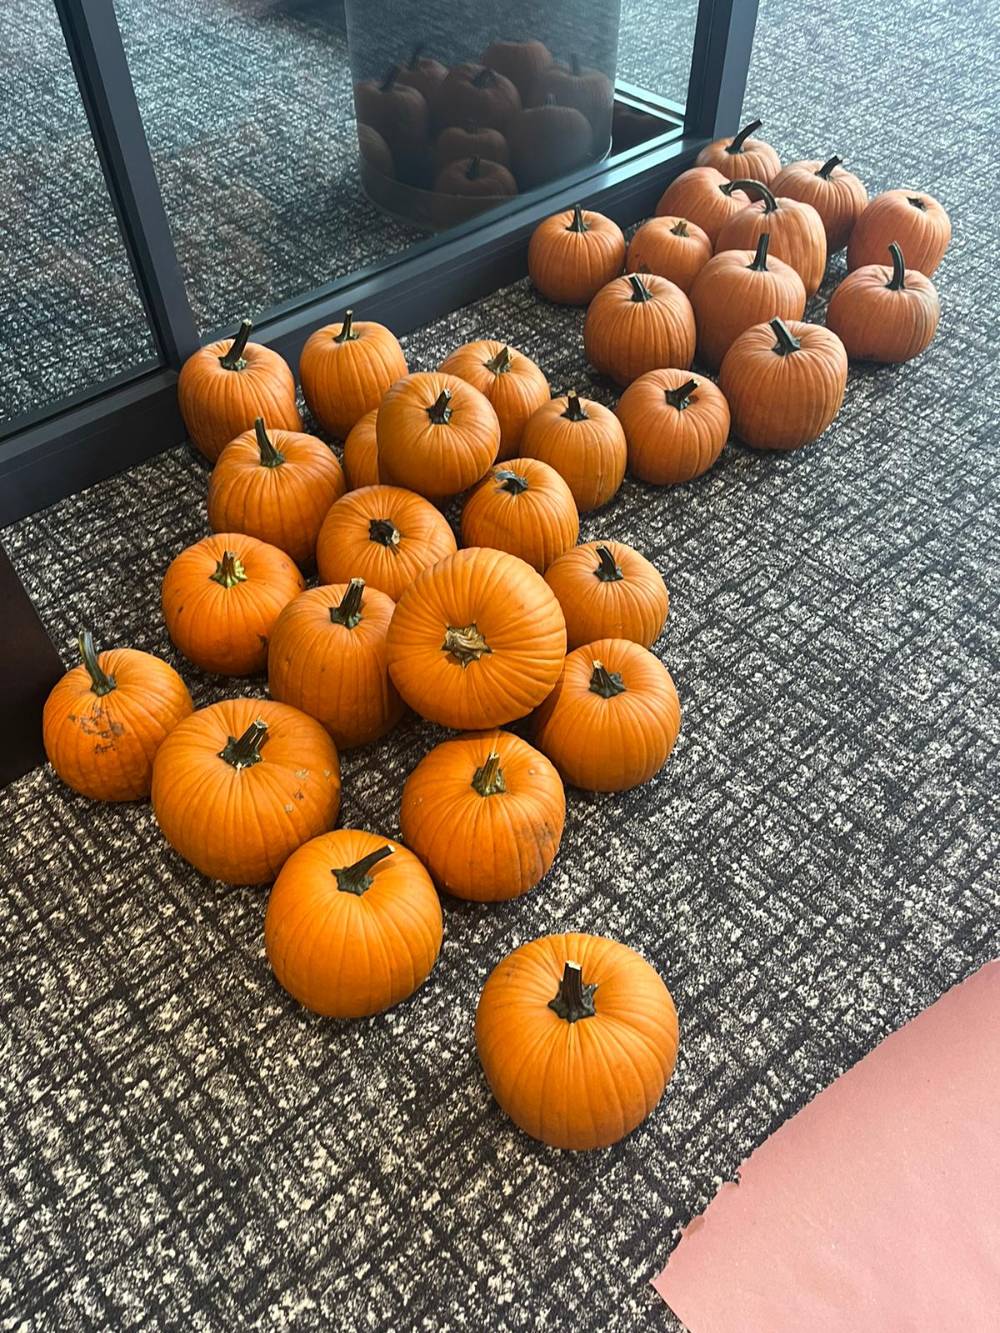 Pumpkins ready for carving